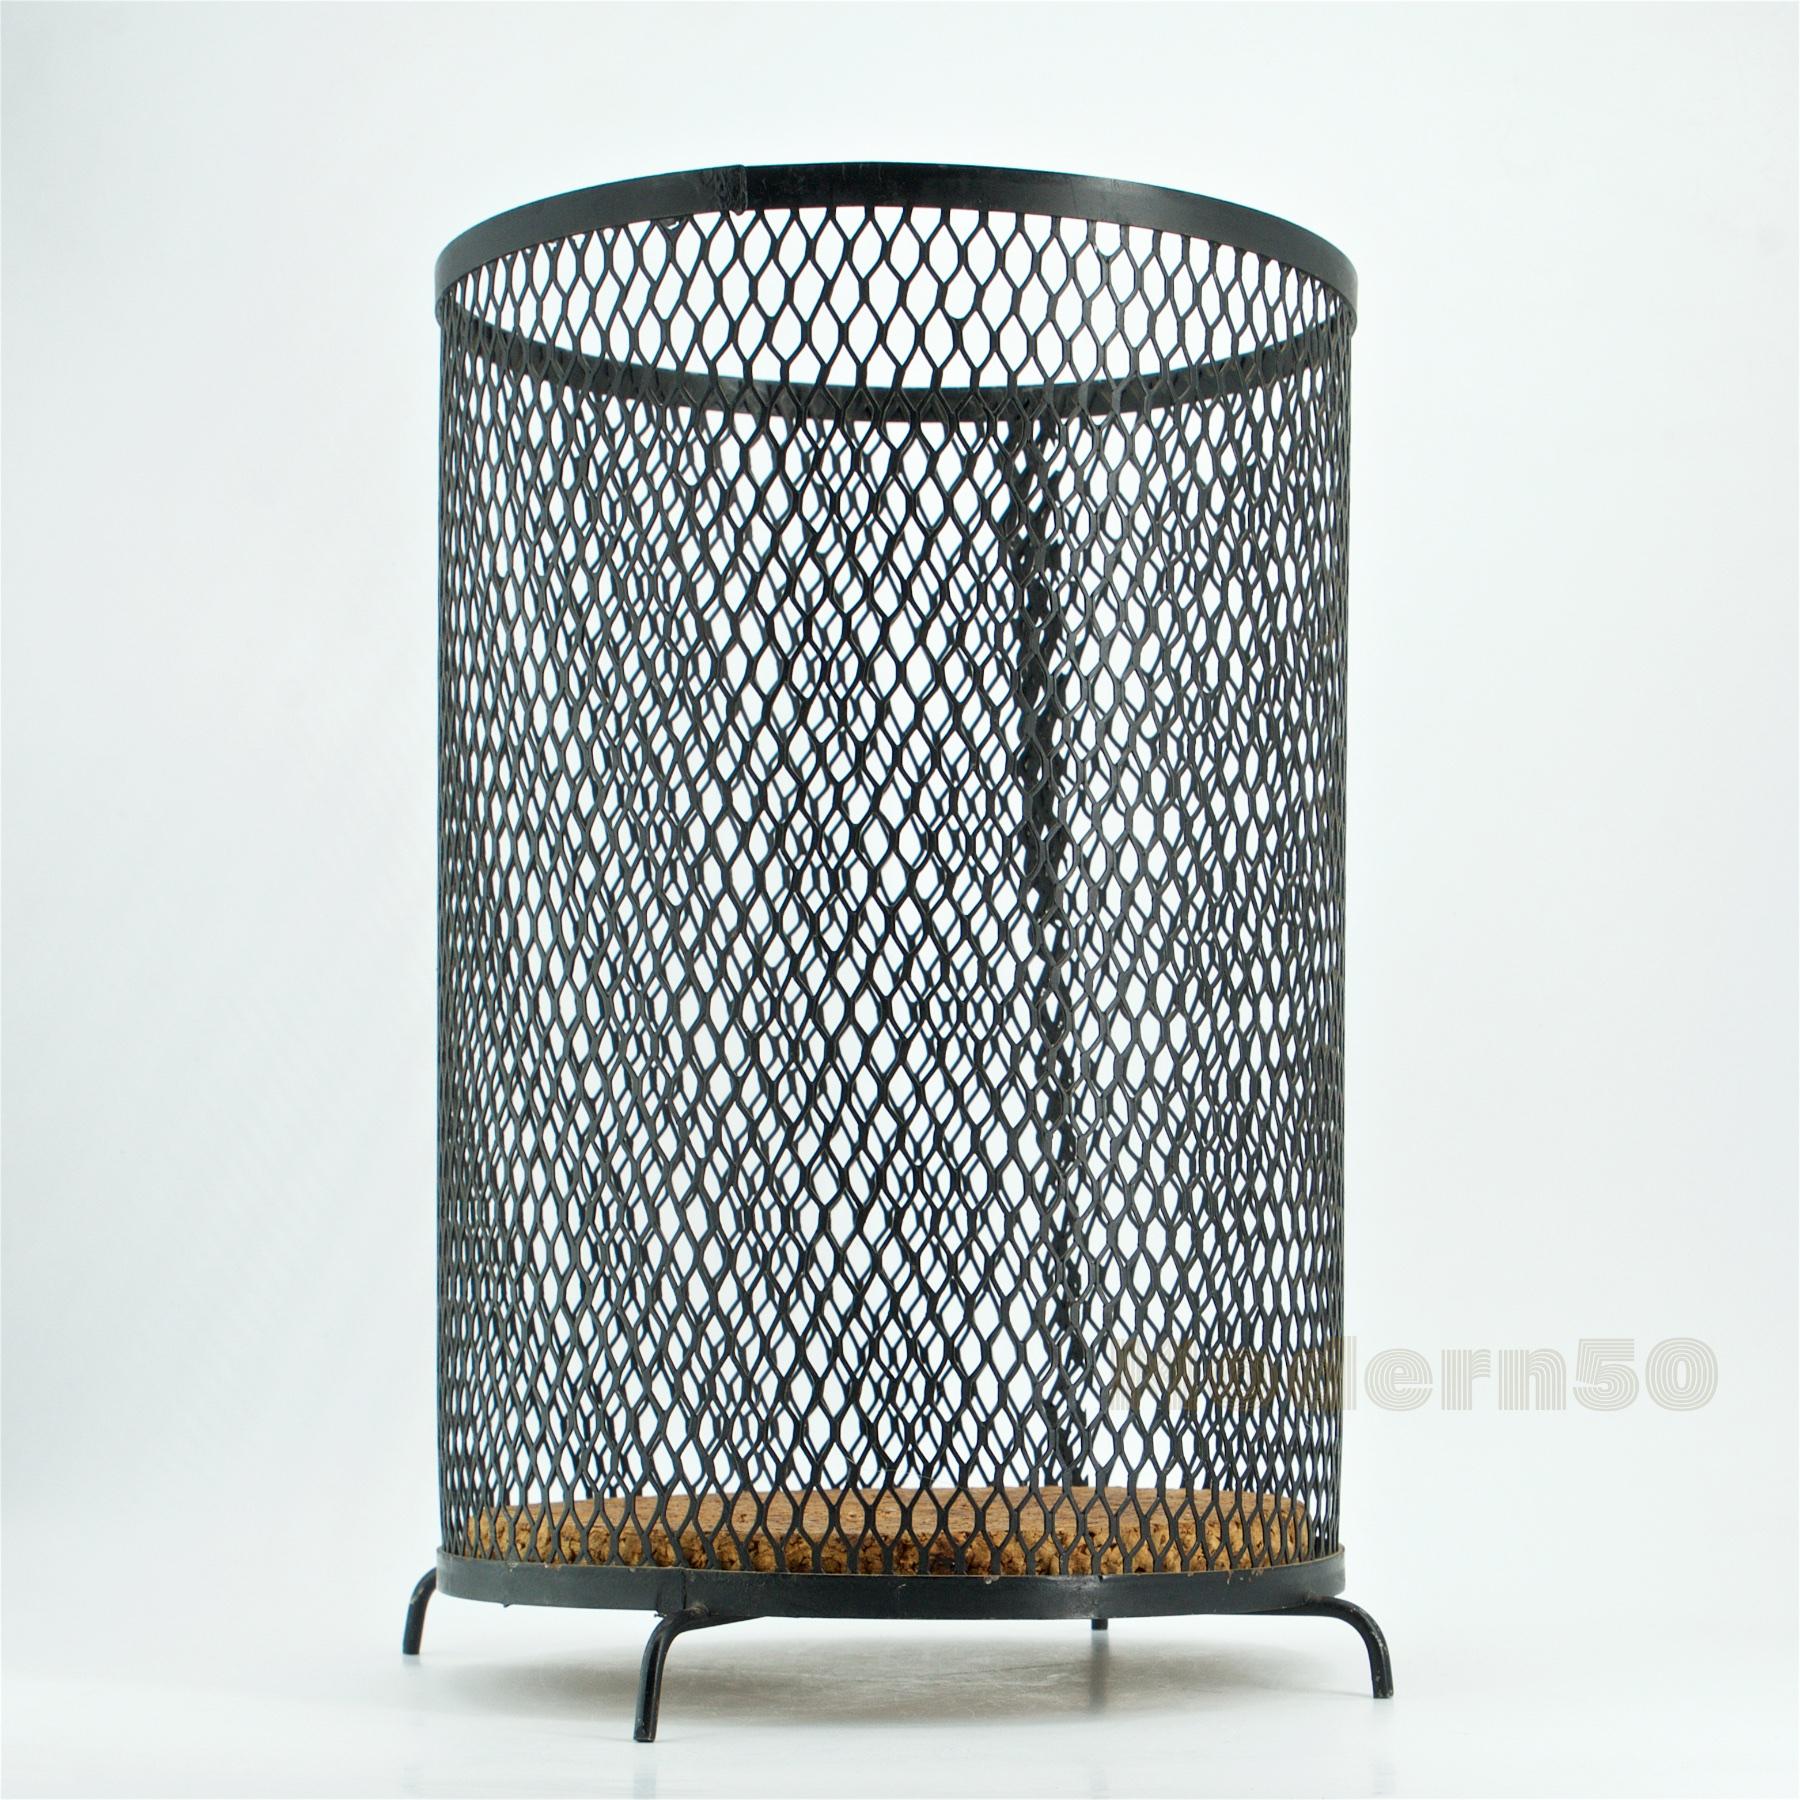 Wonderful little Atomic Age expanded metal trash can with a new sewn in cork bottom. Unknown designer. Basket only diameter is 8.5 in.